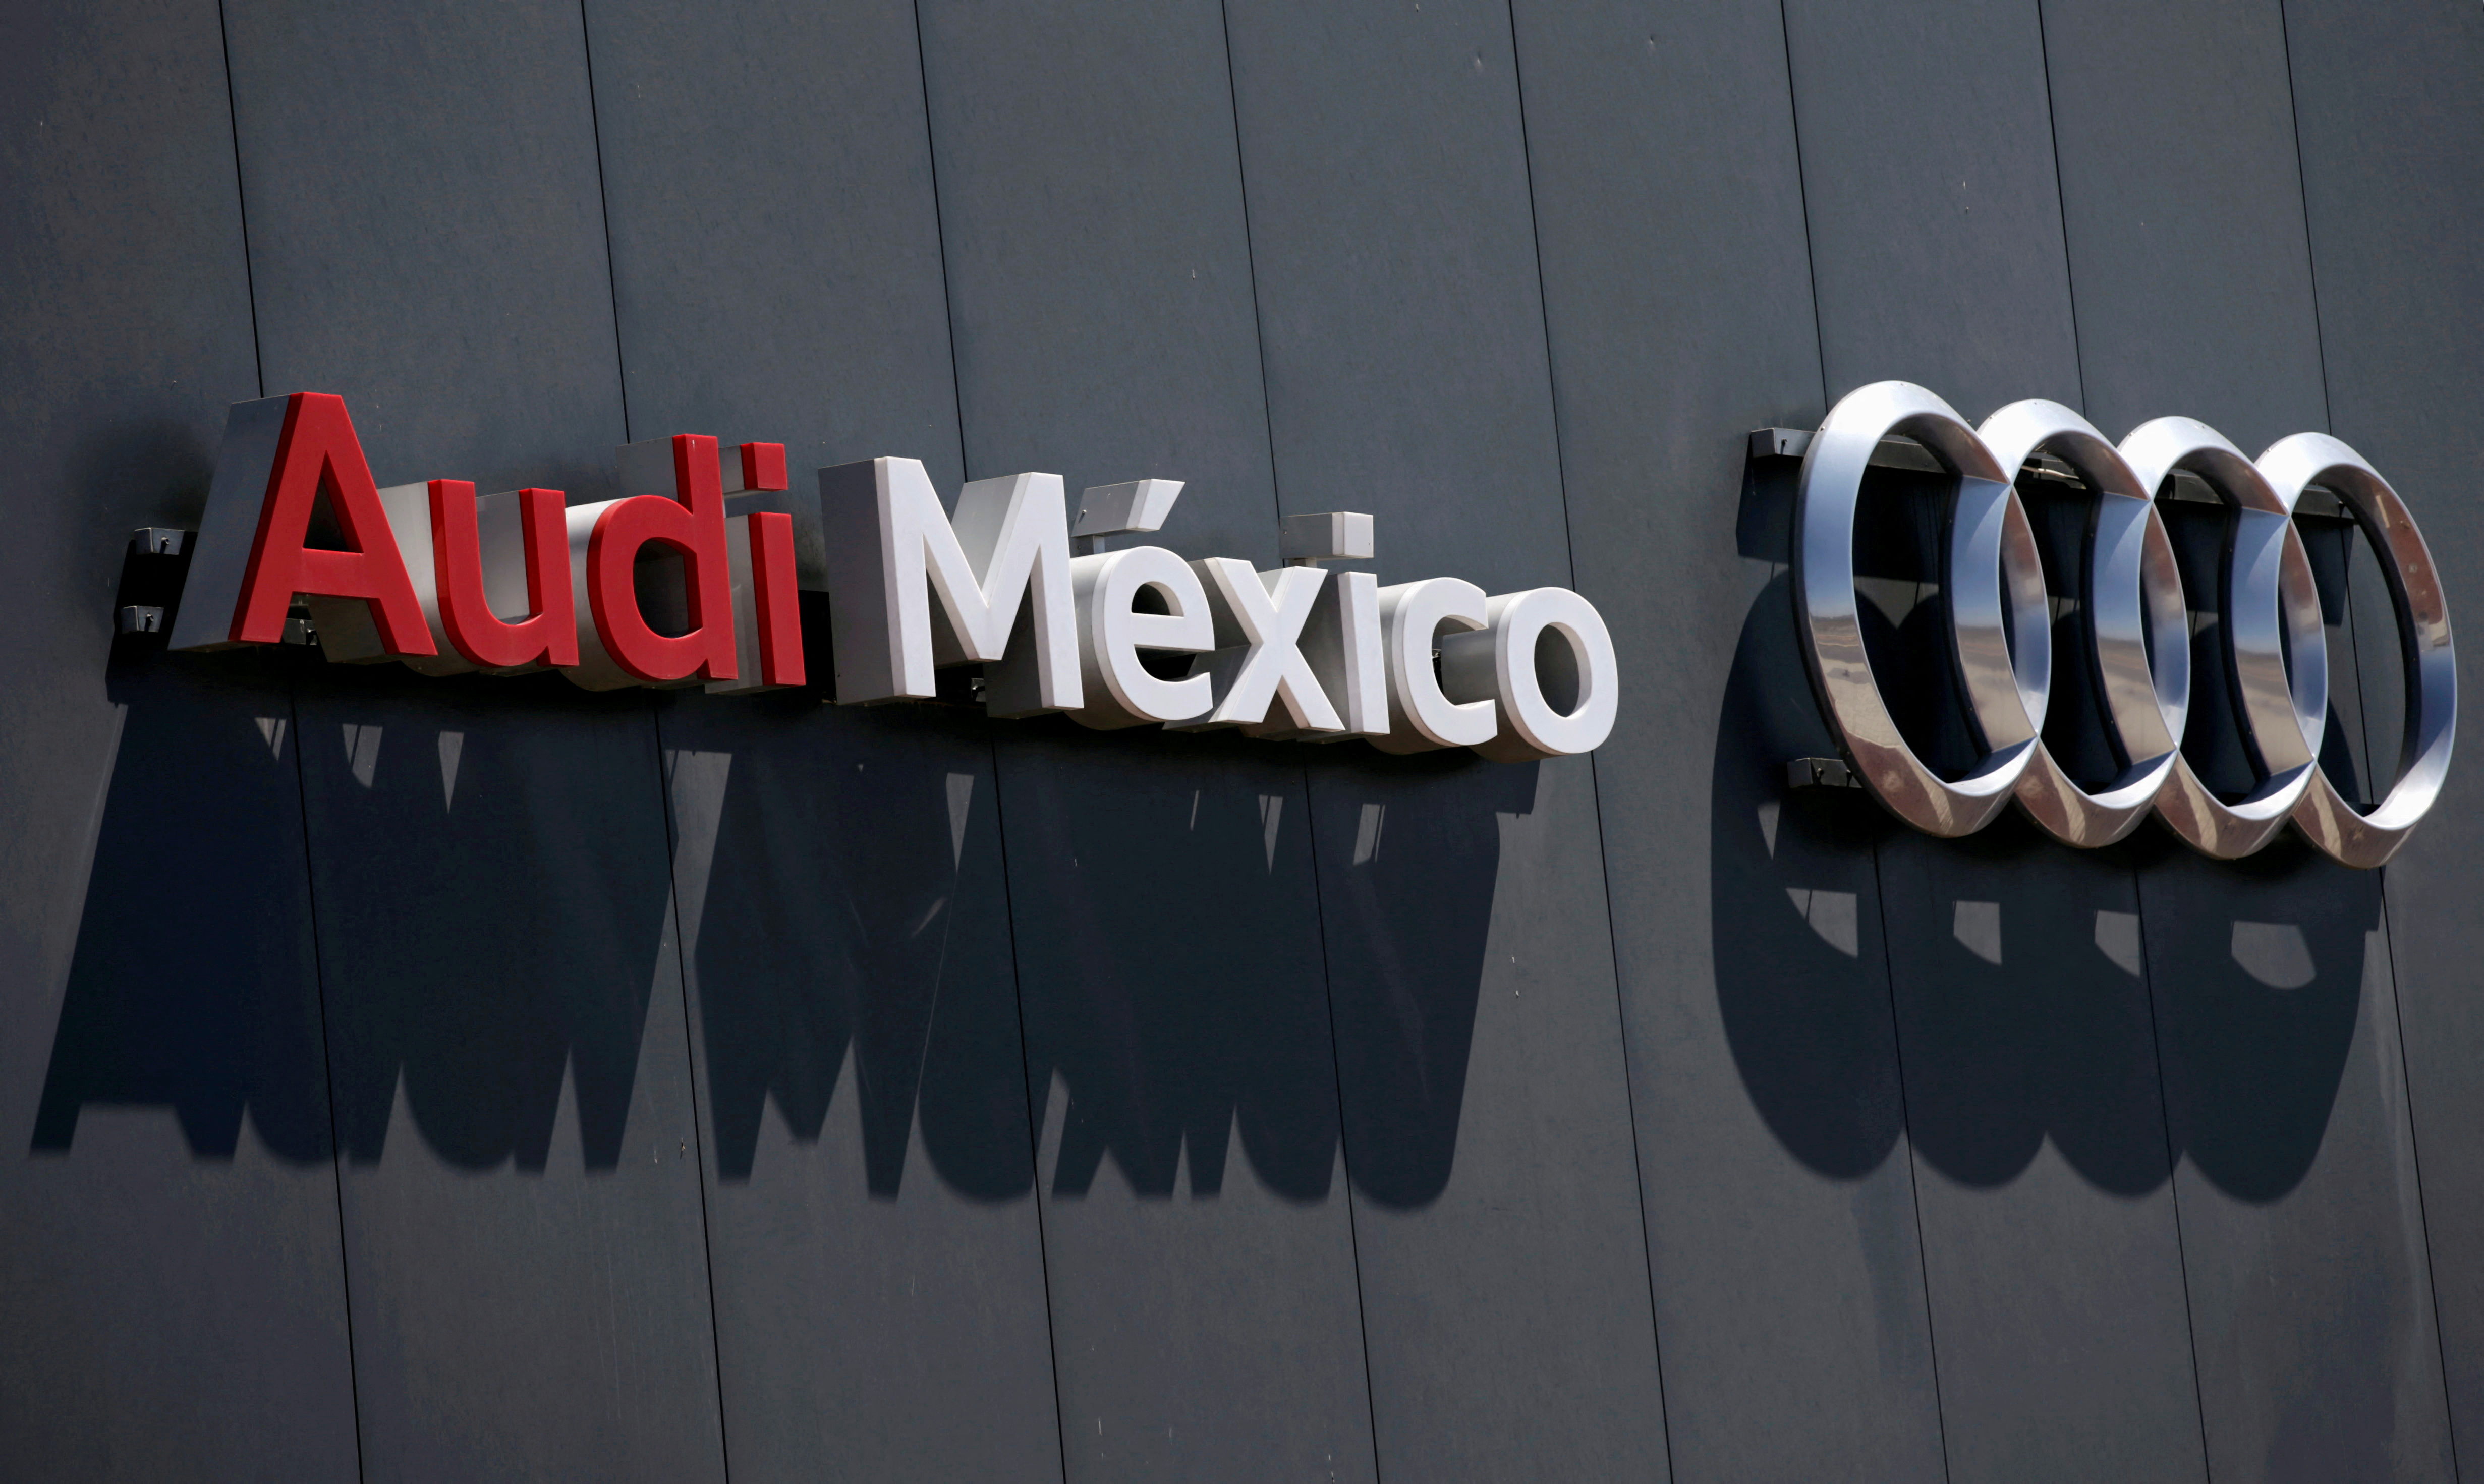 The logo of the German car manufacturer Audi is pictured on the wall of the plant during a media tour in San Jose Chiapa